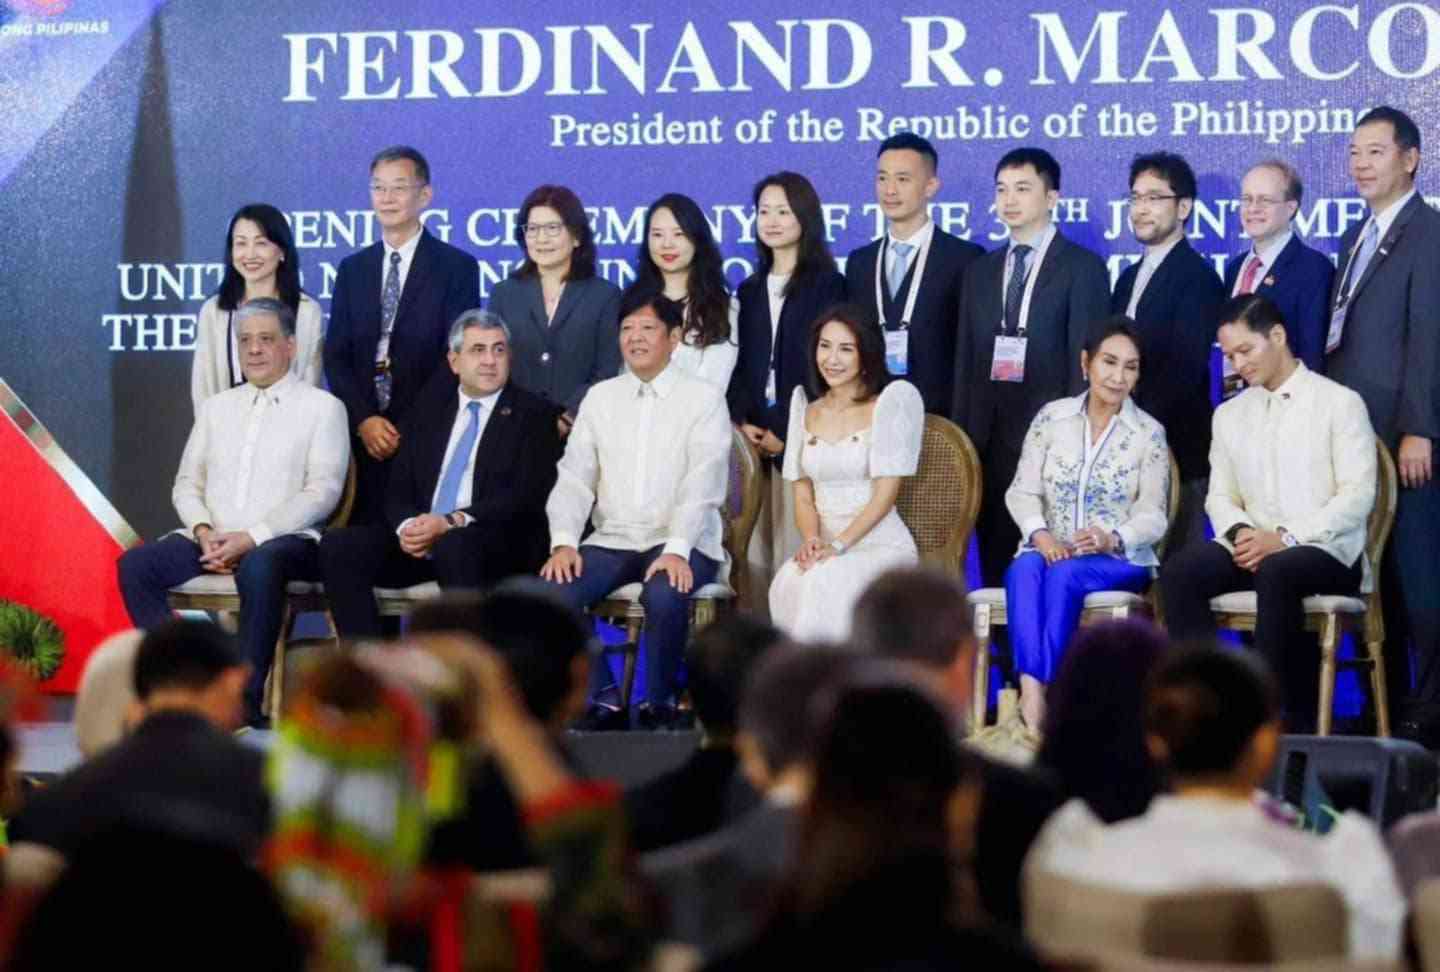 Marcos vows strengthening PH tourism sector through quality education, sustainability